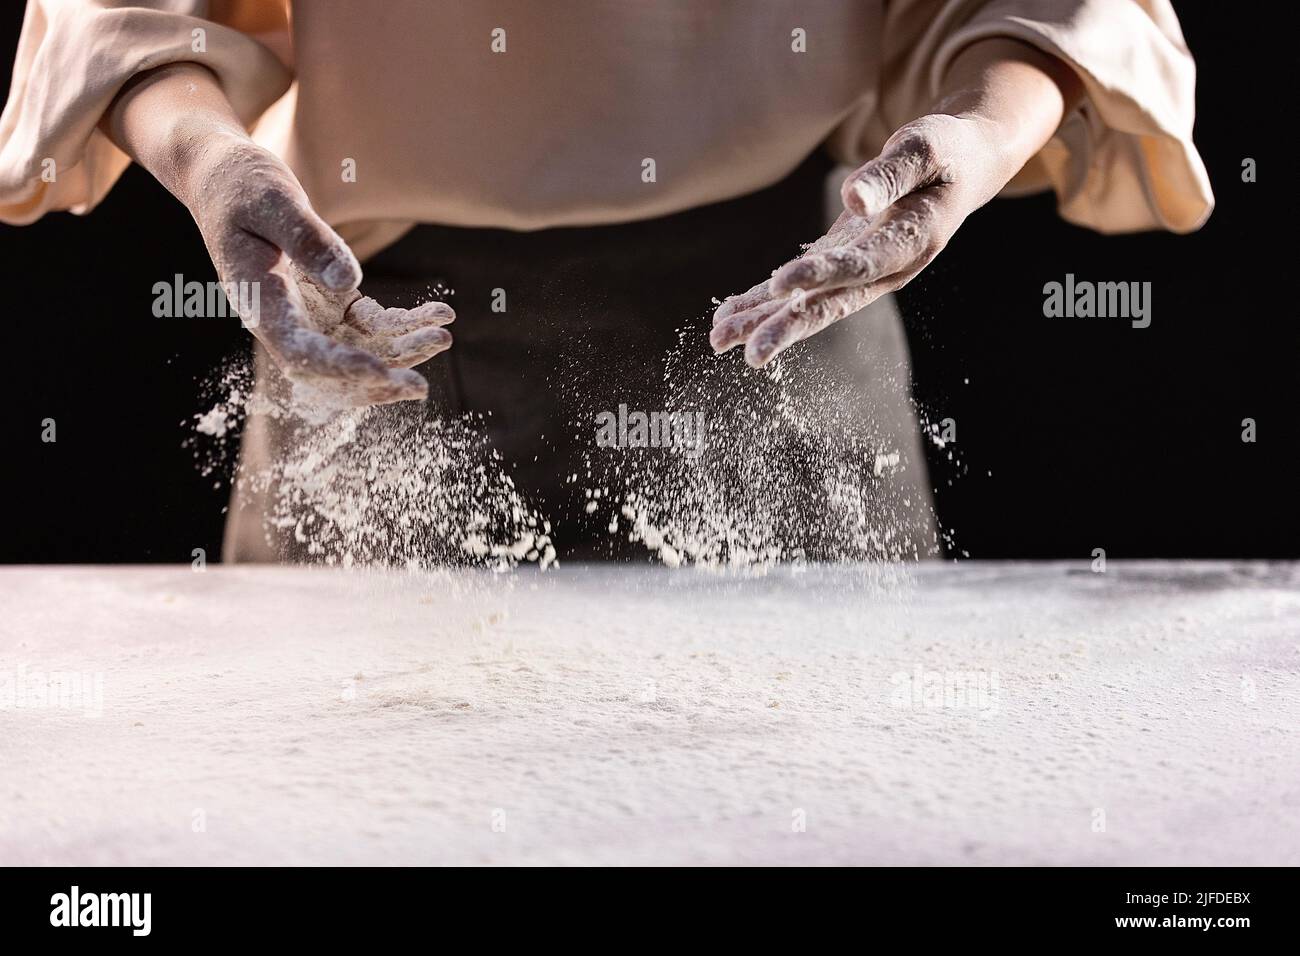 Sprinkle the flour evenly on the kitchen counter, the process of making Chinese traditional cuisine three fresh dumplings - stock photo Stock Photo